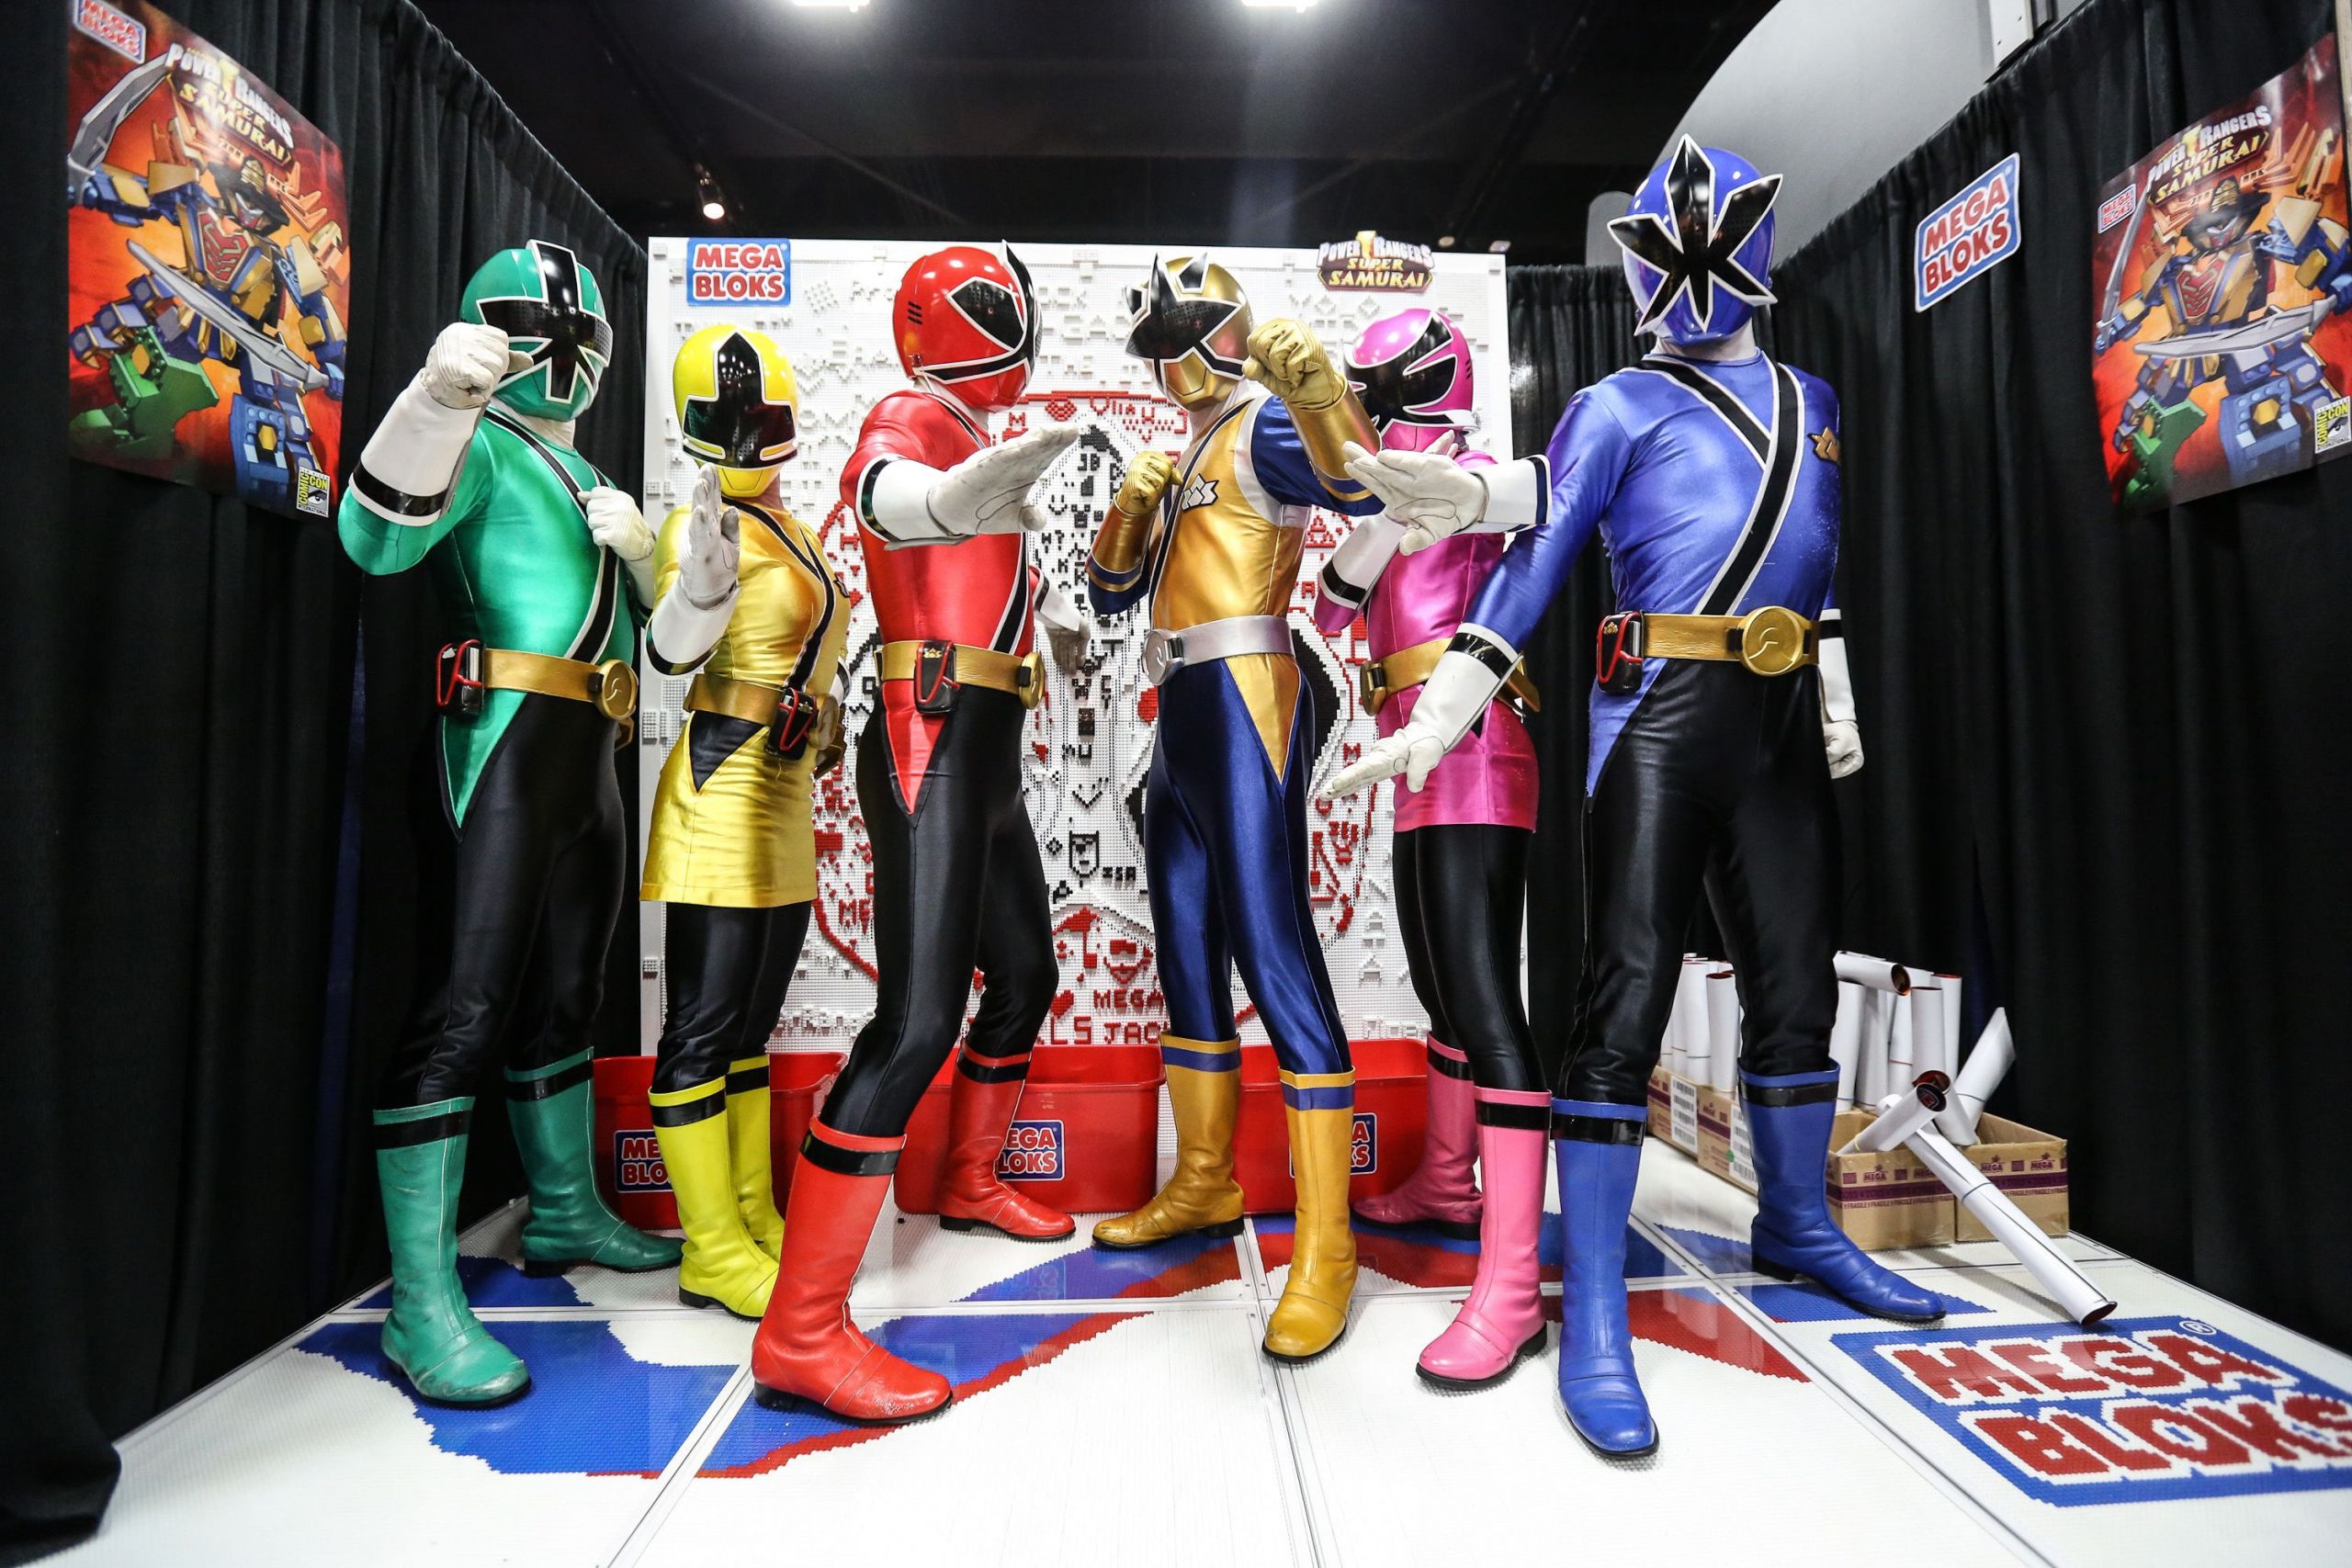 DIY Power Ranger Costumes
 How to Make a Power Rangers Costume